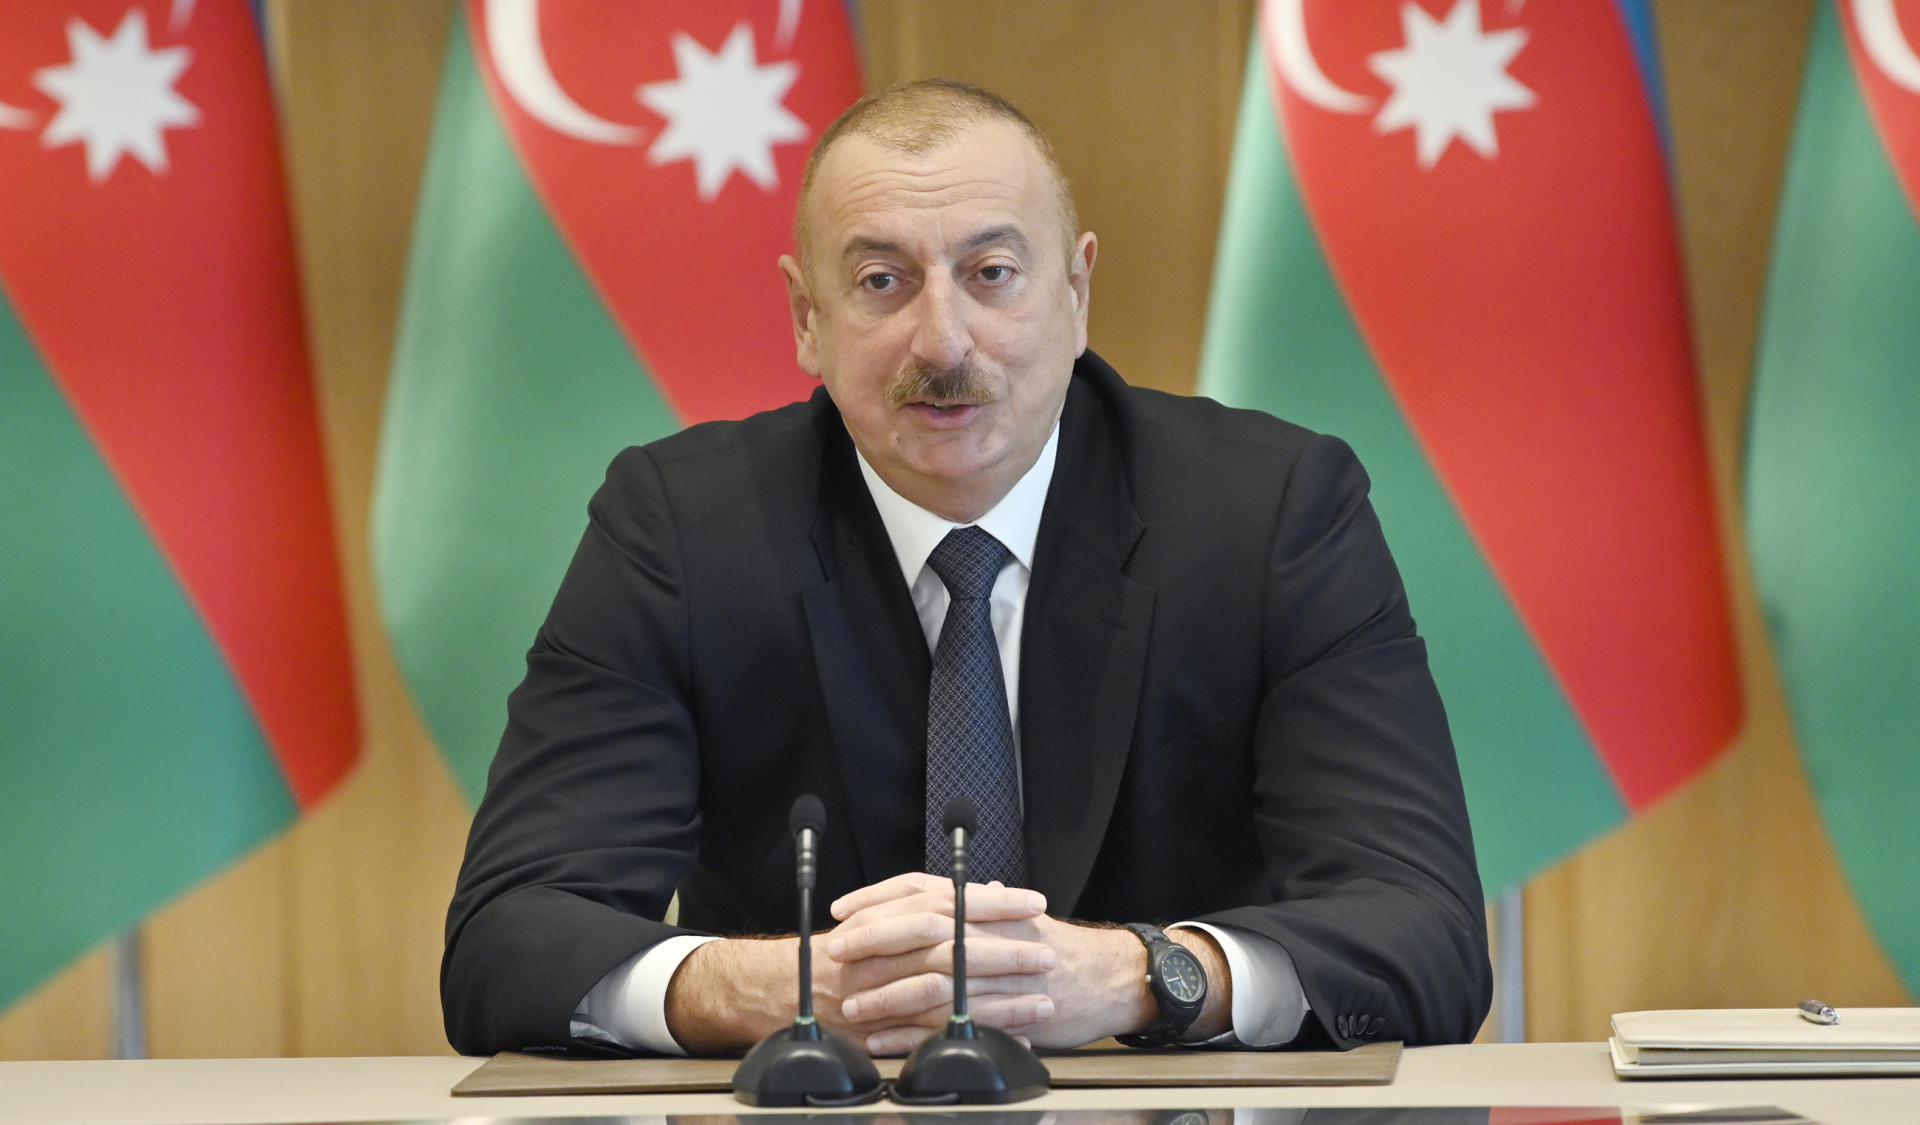 President Ilham Aliyev: Azerbaijan is in top division, while Armenia is in third league, and this difference will gradually increase